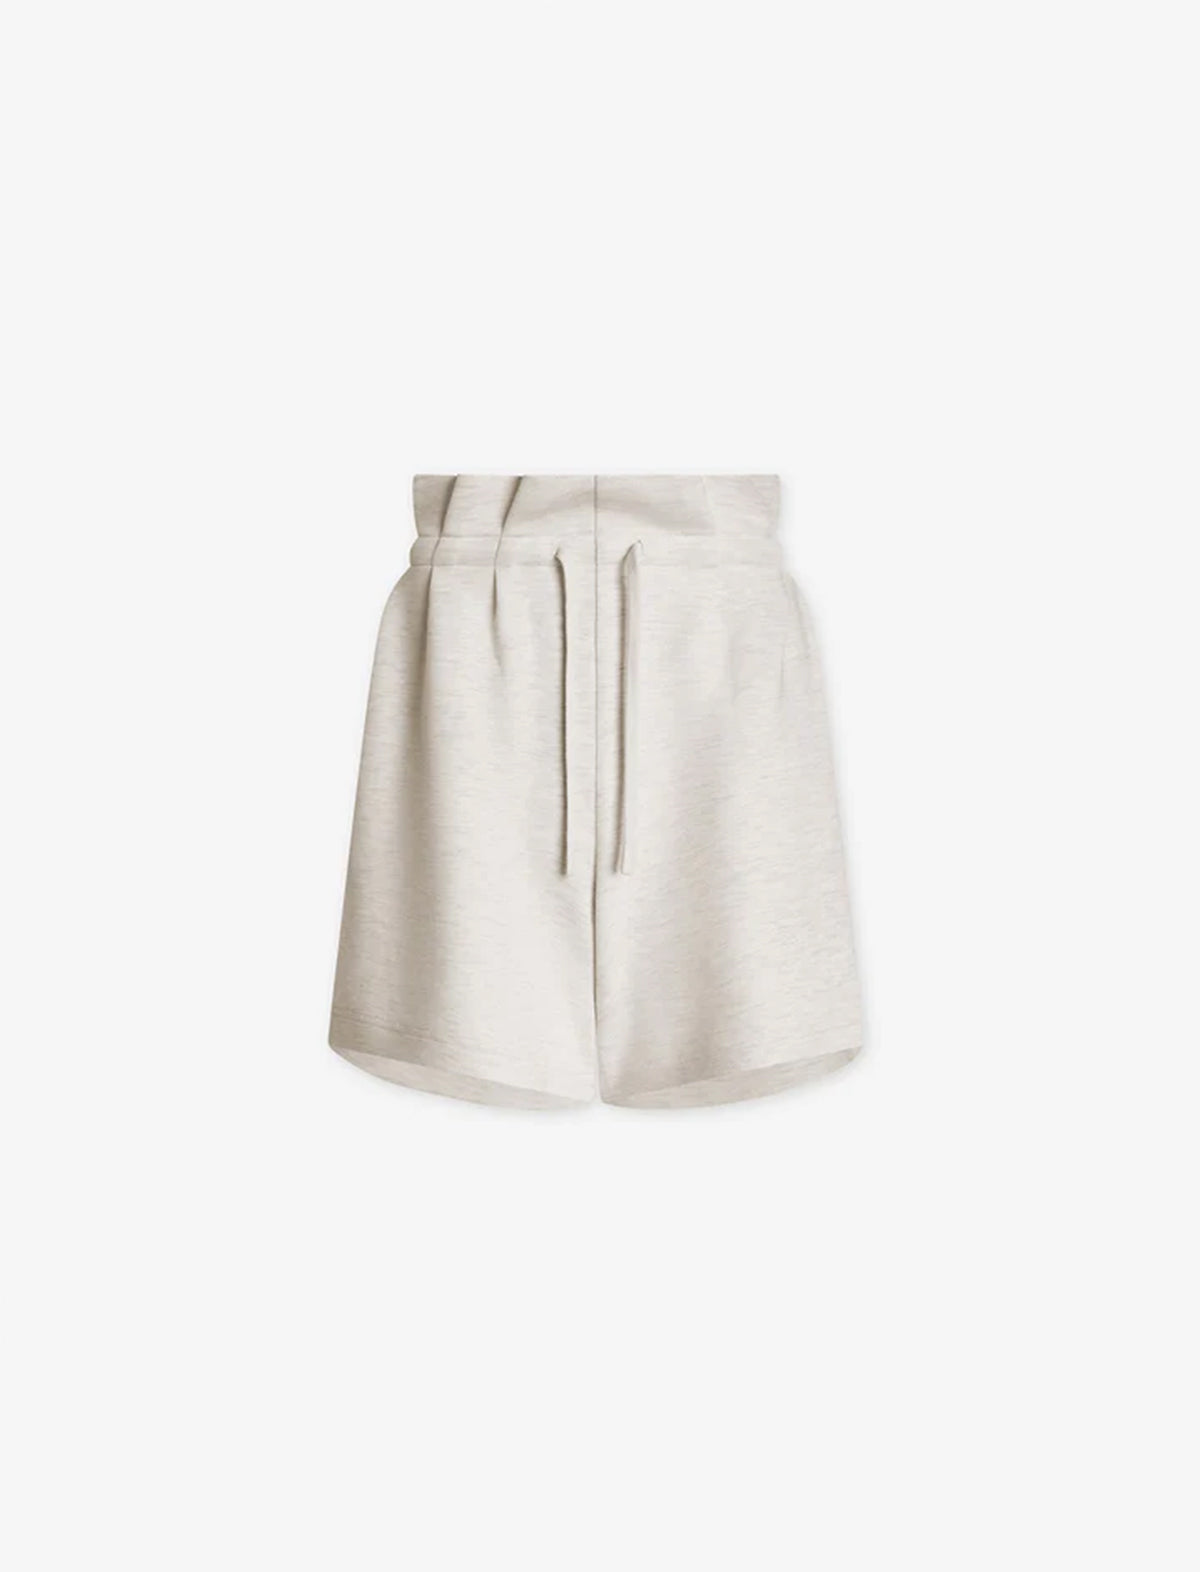 VARLEY Claude High Rise Short 4.5 in Ivory Marl